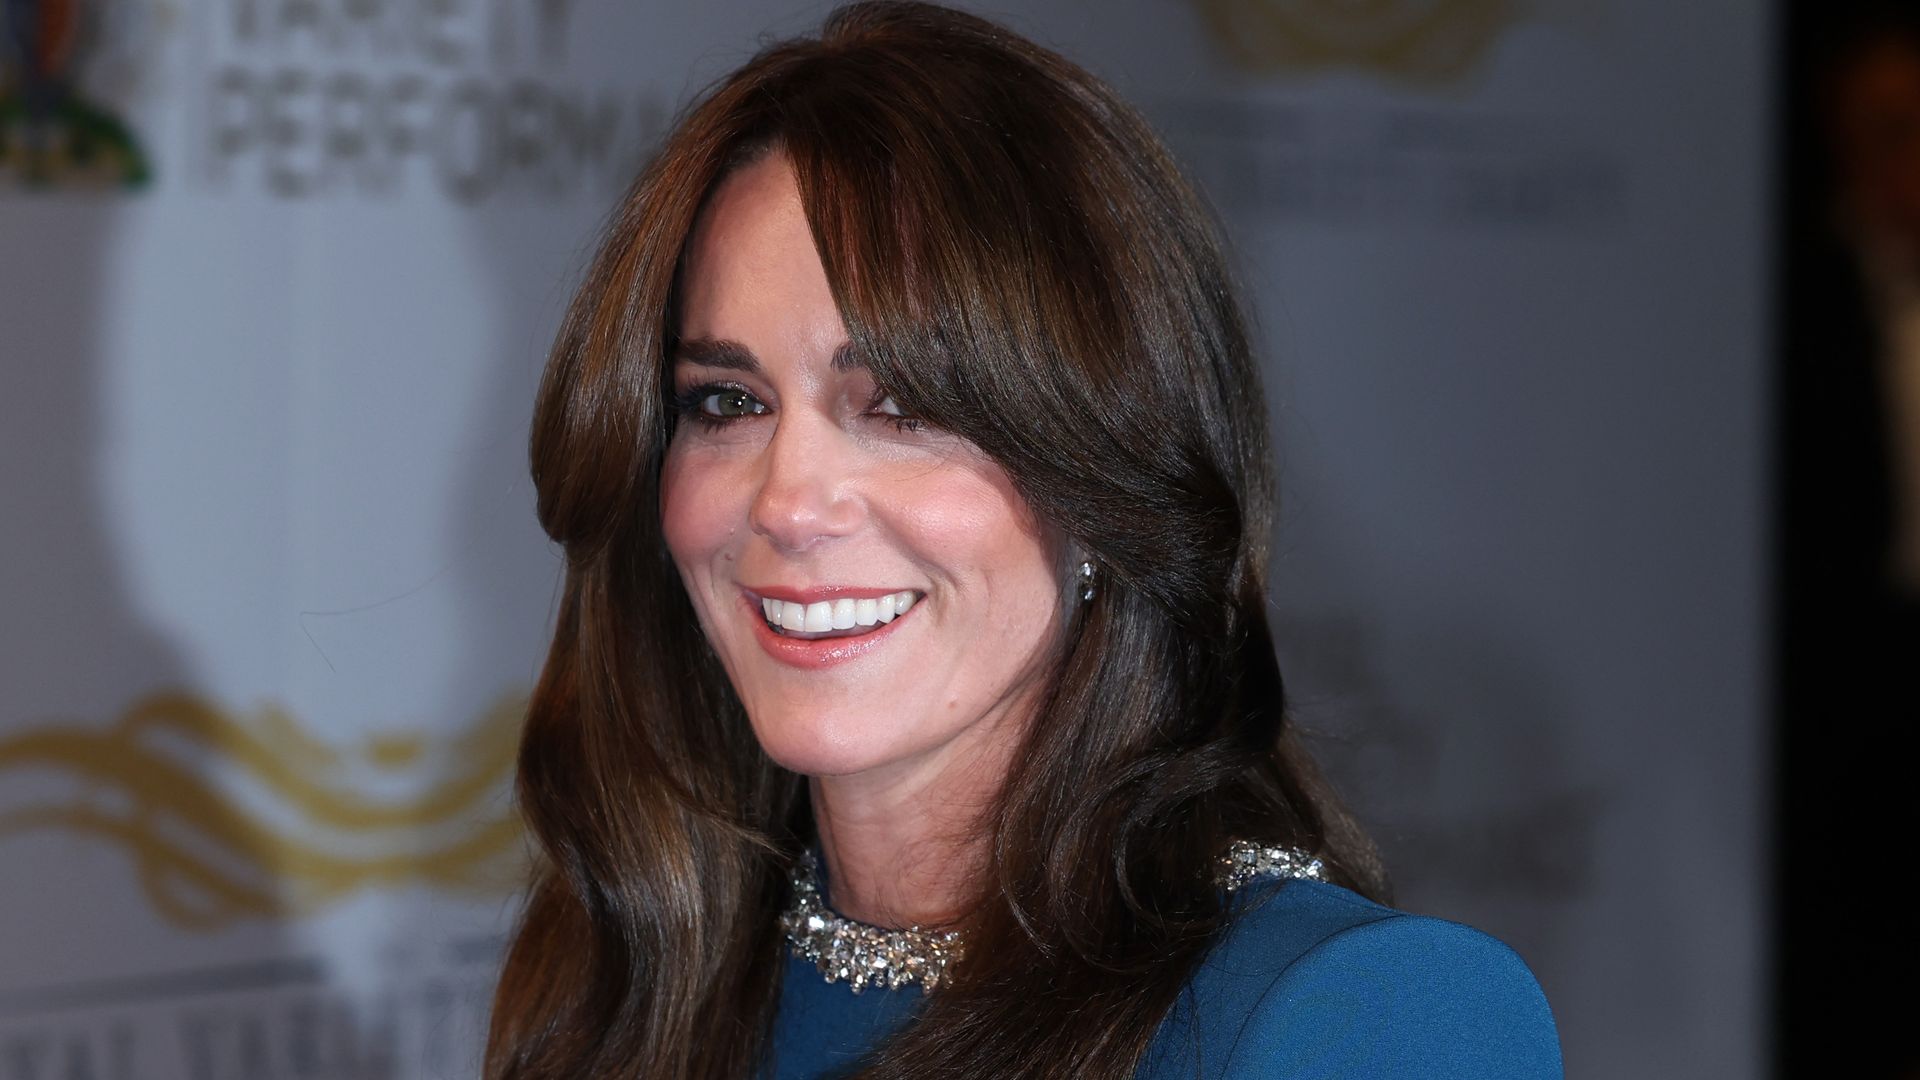 Princess Kate is a red carpet wonder in teal dress with dramatic sleeves